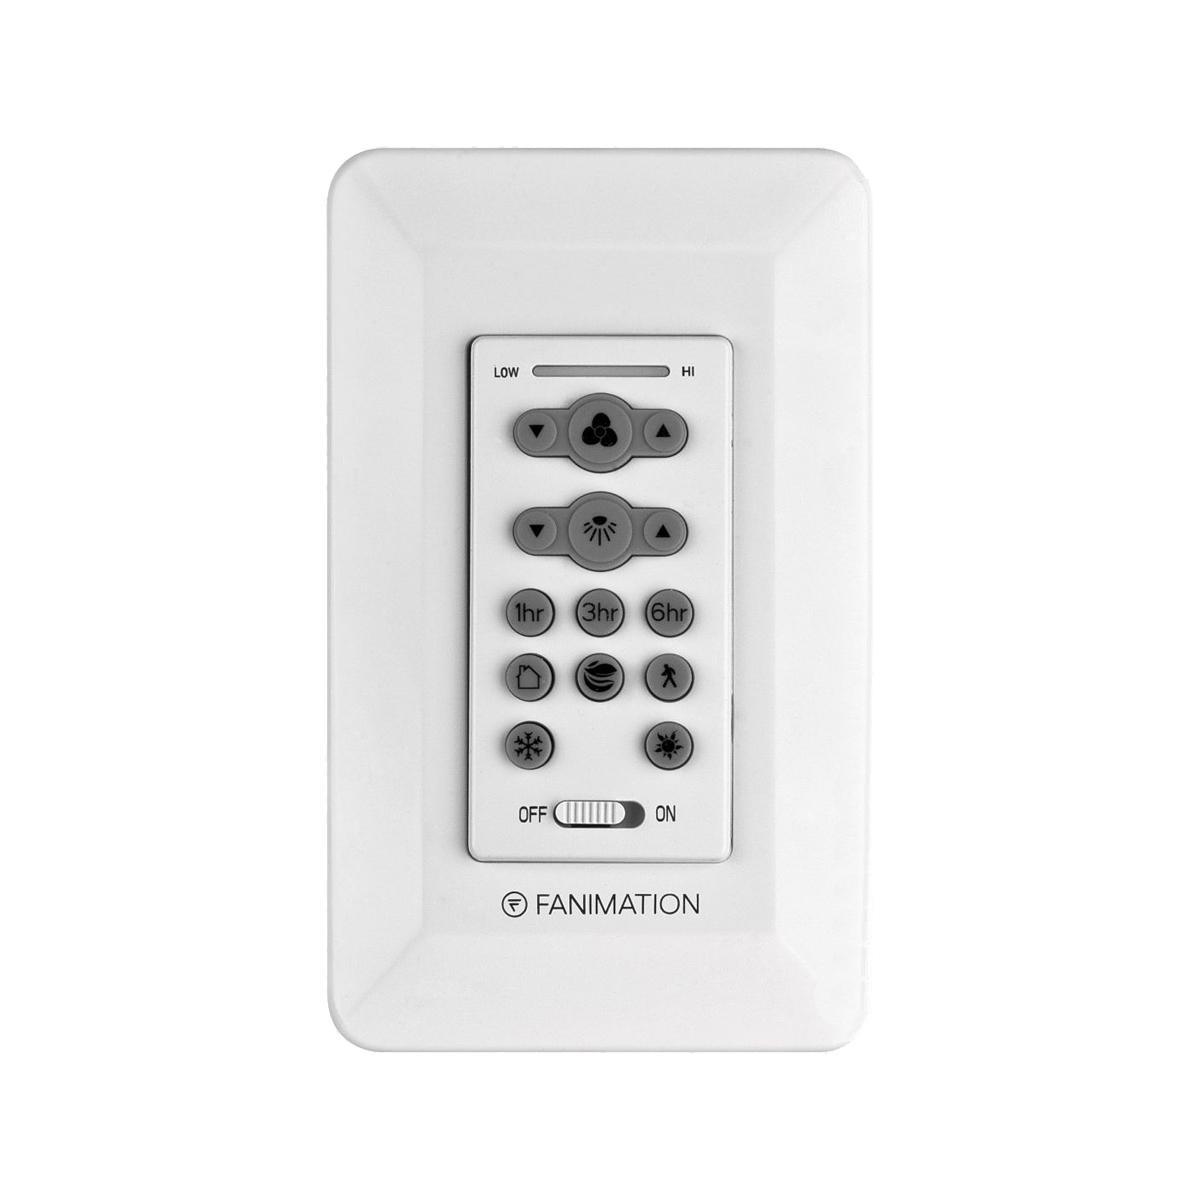 6-Speed DC Ceiling Fan And Light Wall Control With Receiver, Reversing Switch, White Finish